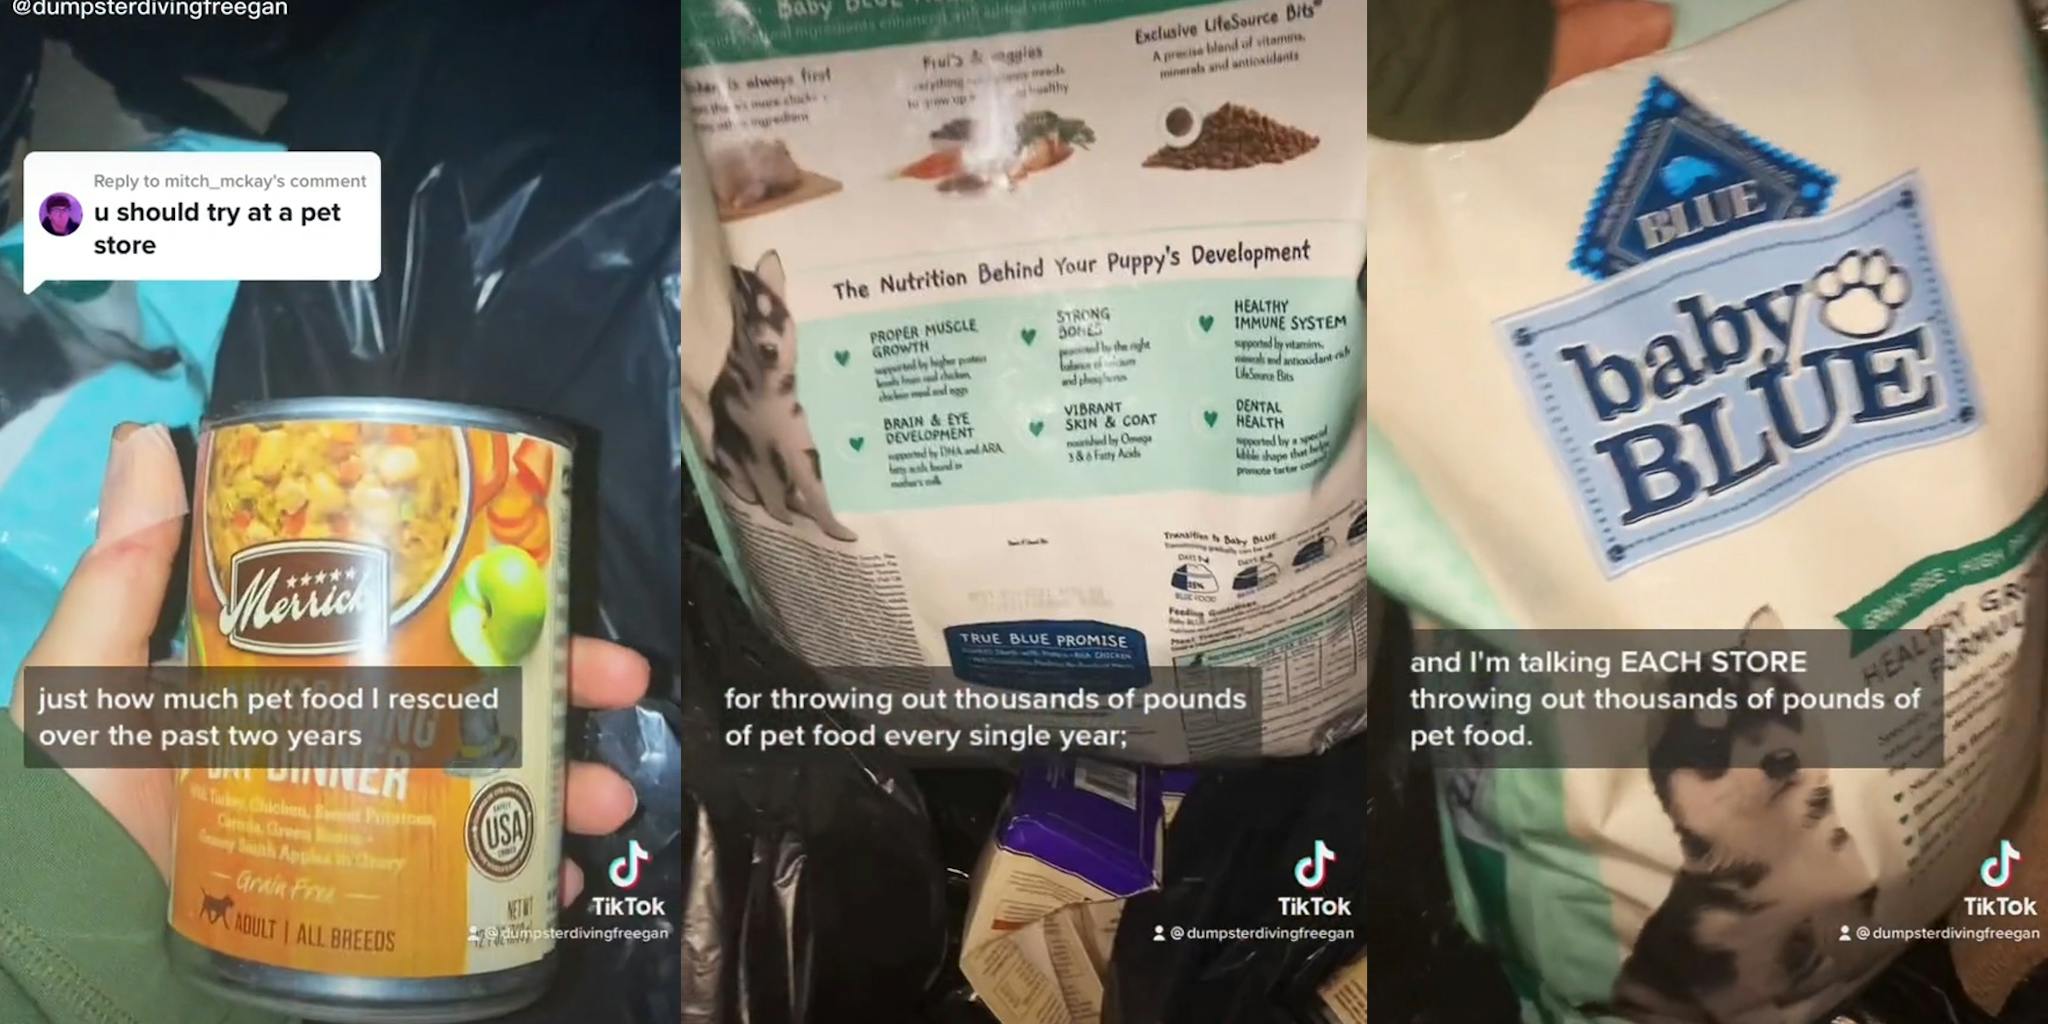 ‘It’s actually kind of insane just how much pet food I’ve rescued’: TikToker reveals how much pet food she found while dumpster diving in viral video